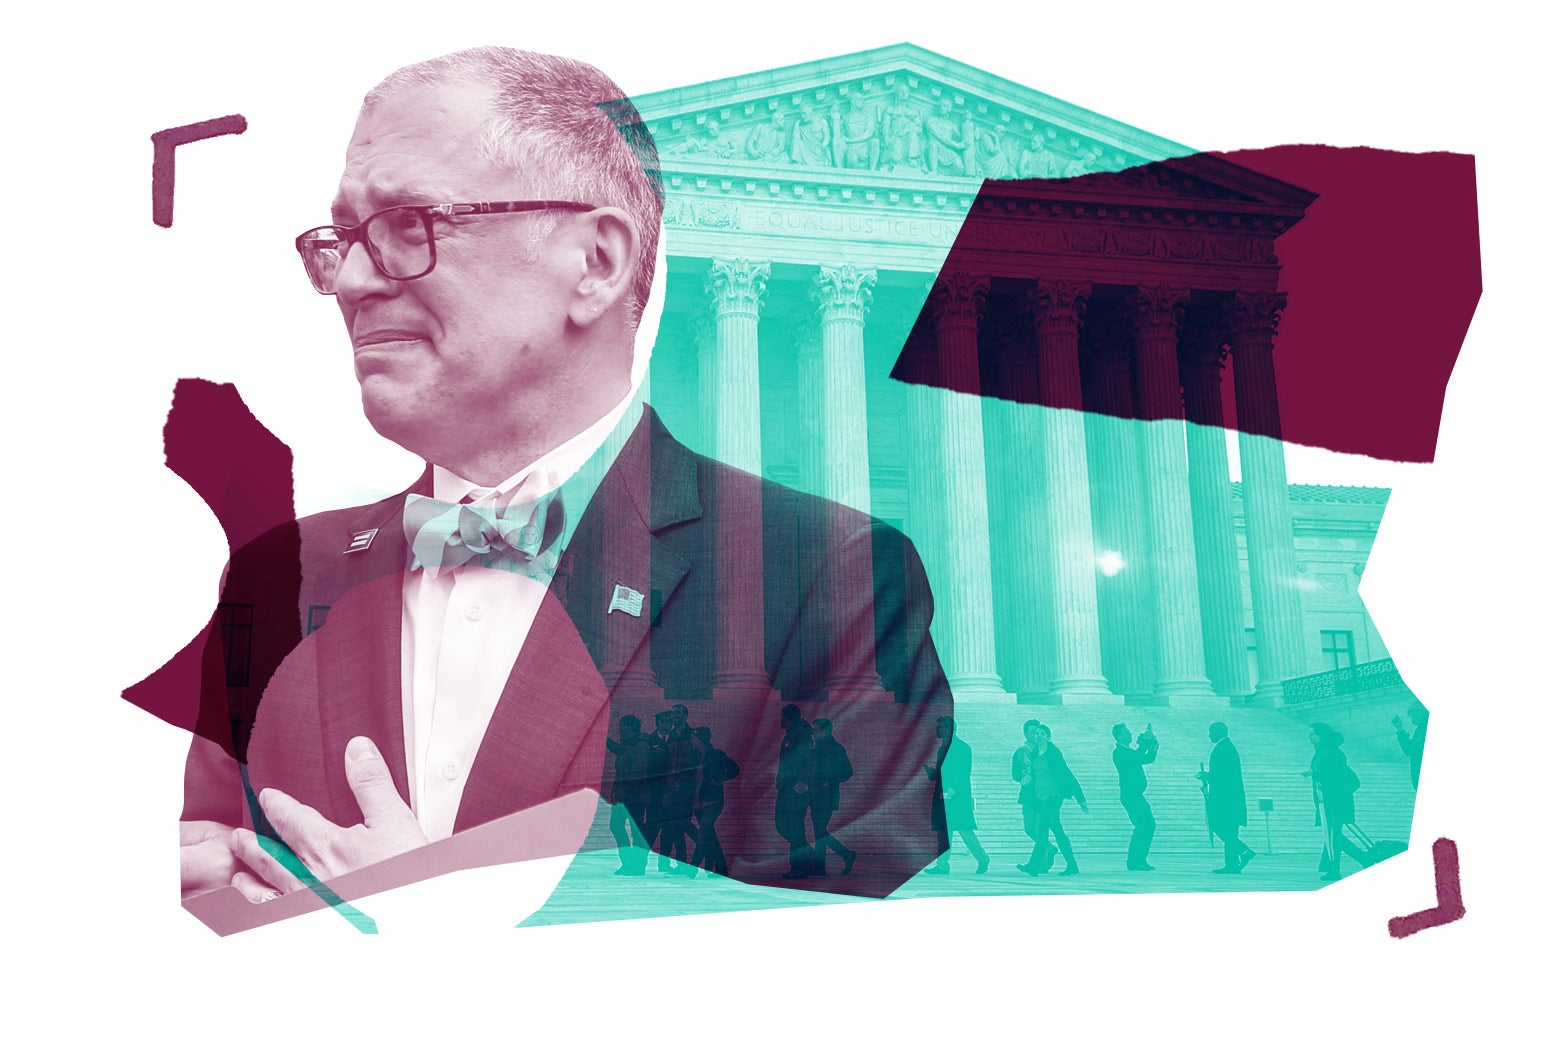 Collage of James Obergefell and the Supreme Court